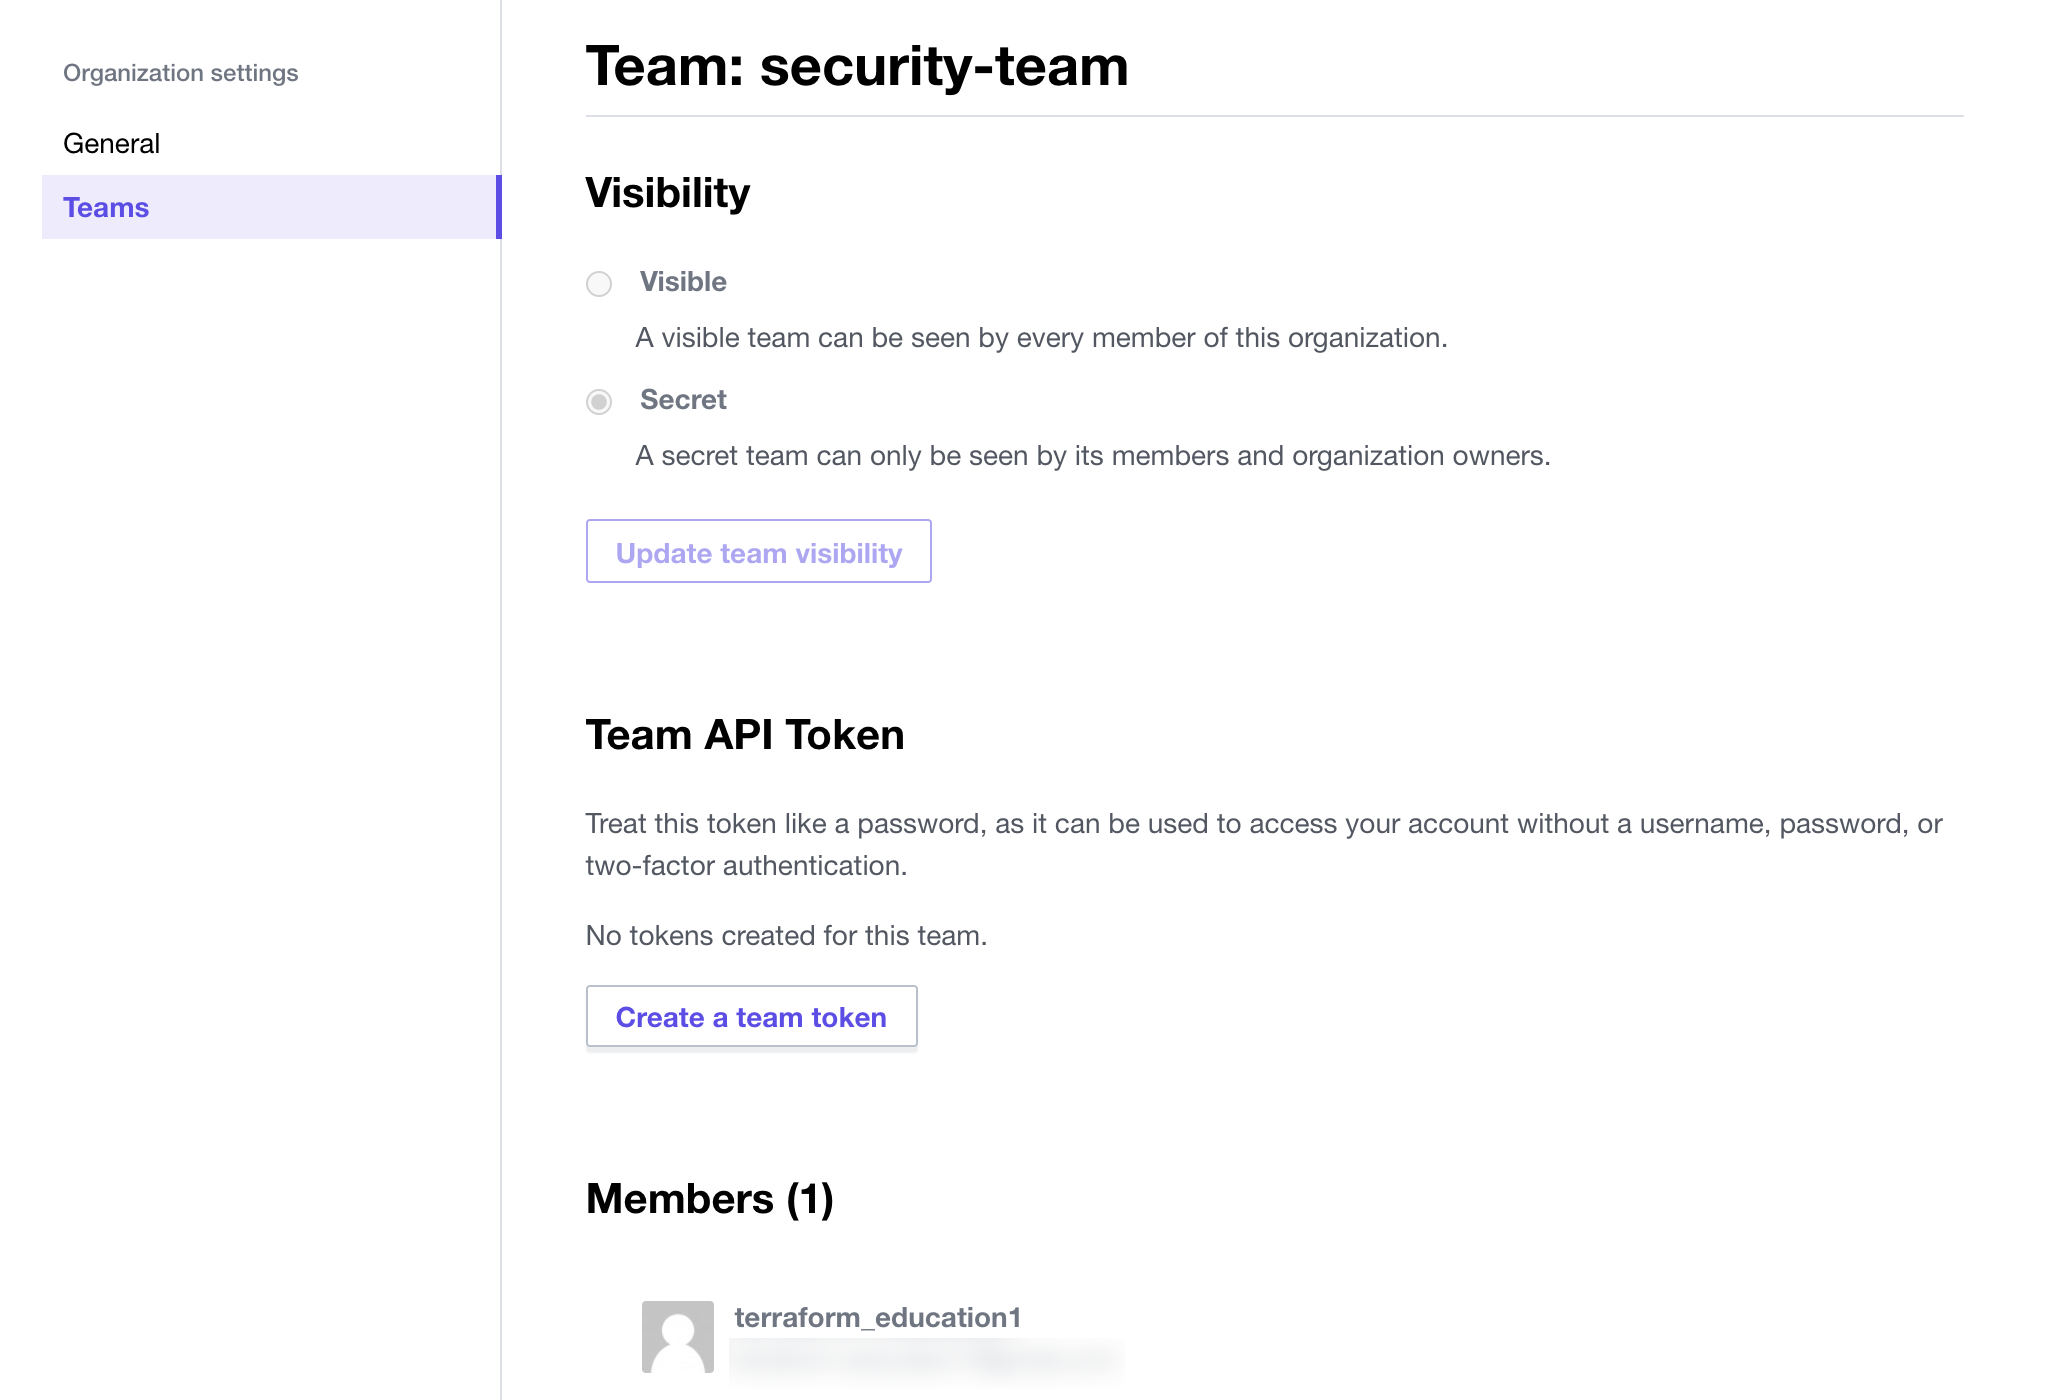 View security-team settings and members